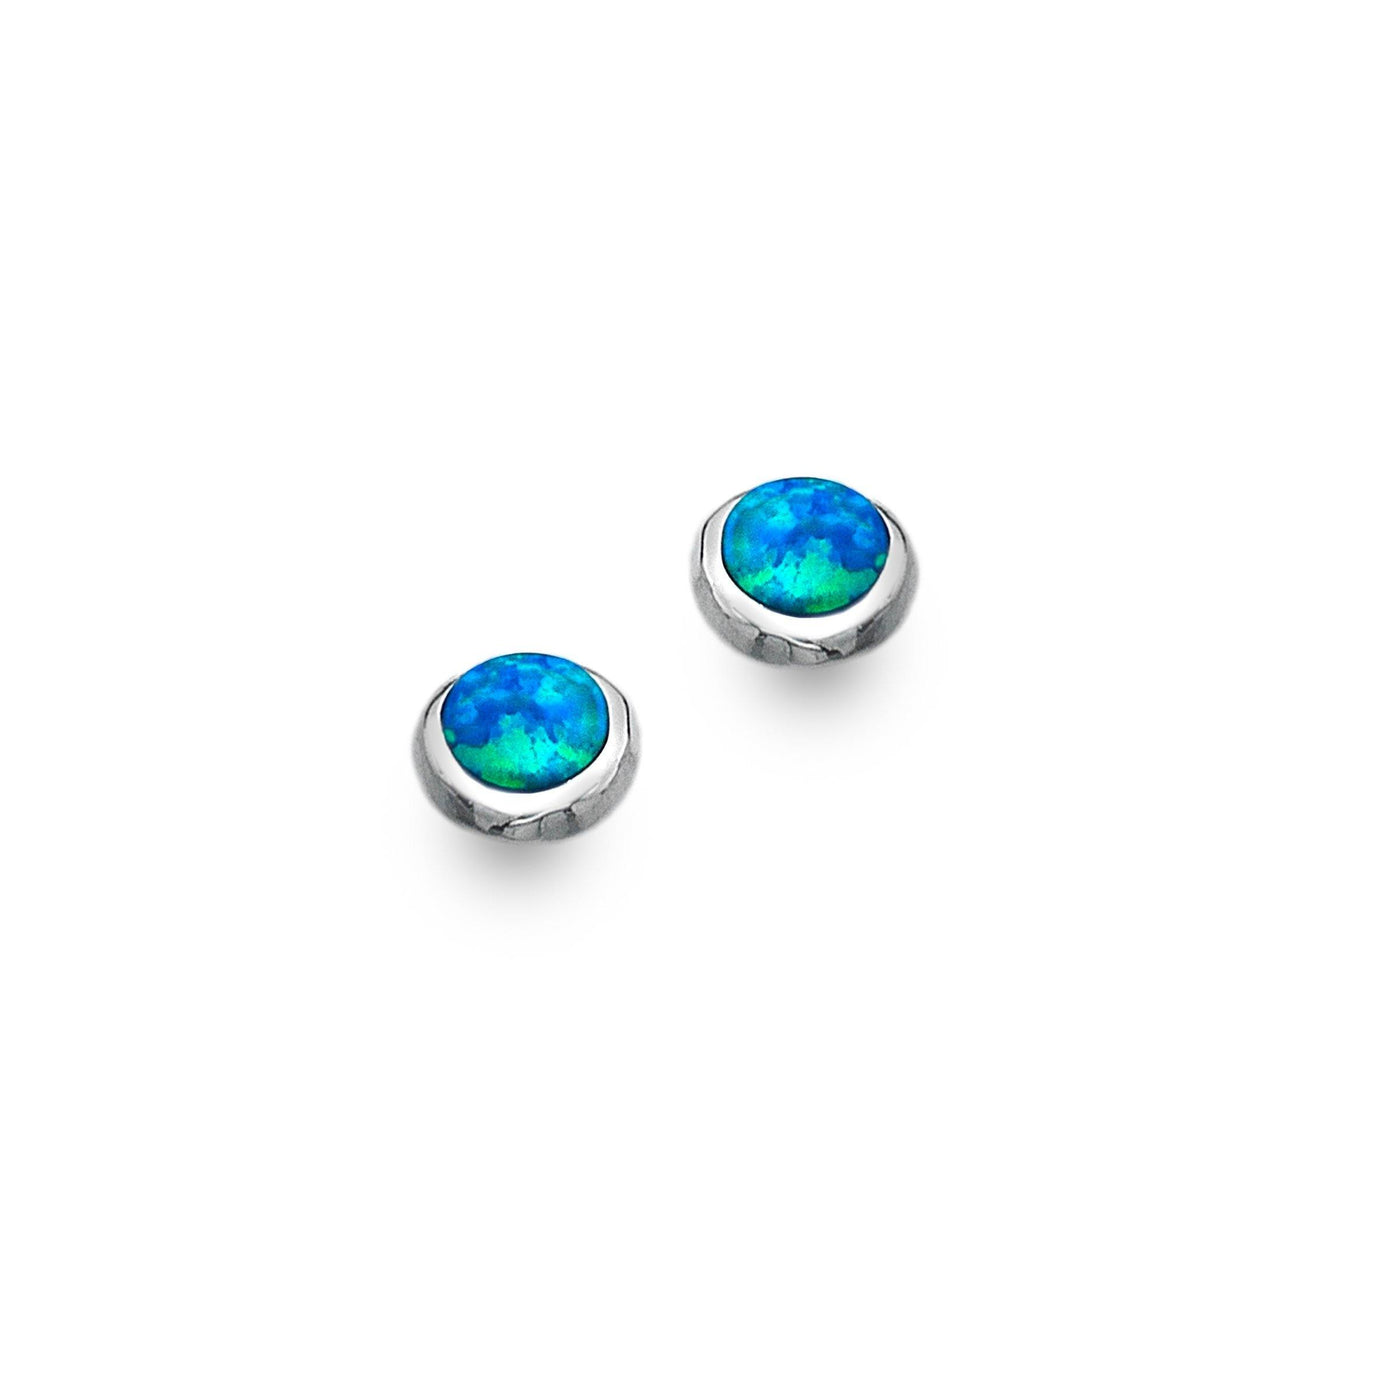 Blue or White Opal Round Stud Earrings in Sterling Silver - Rococo Jewellery